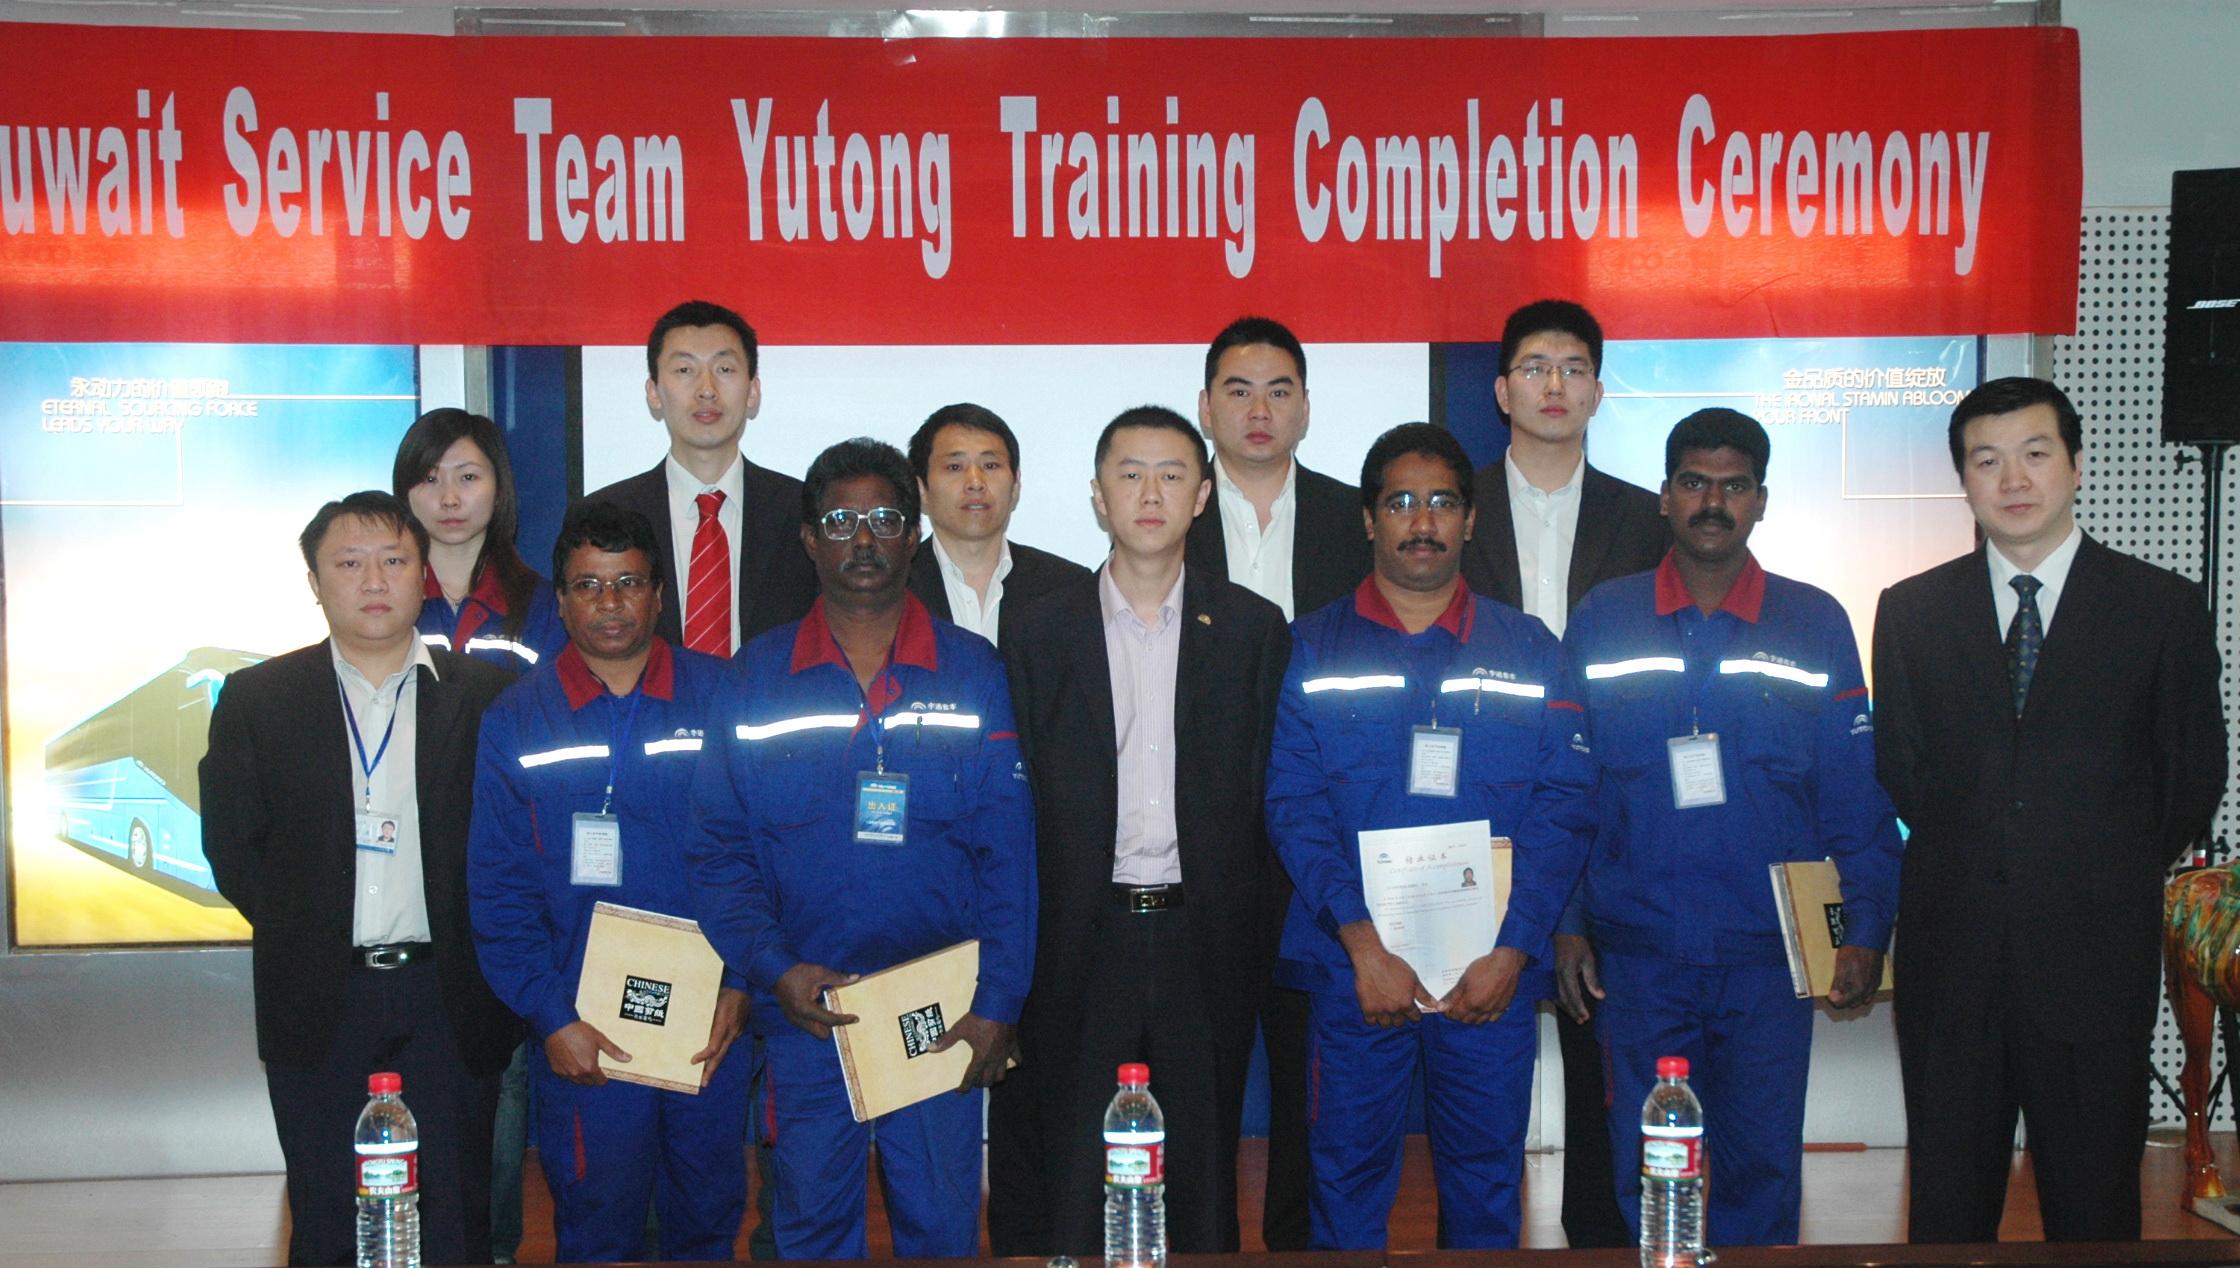 Servicemen from Kuwait Trained in Yutong